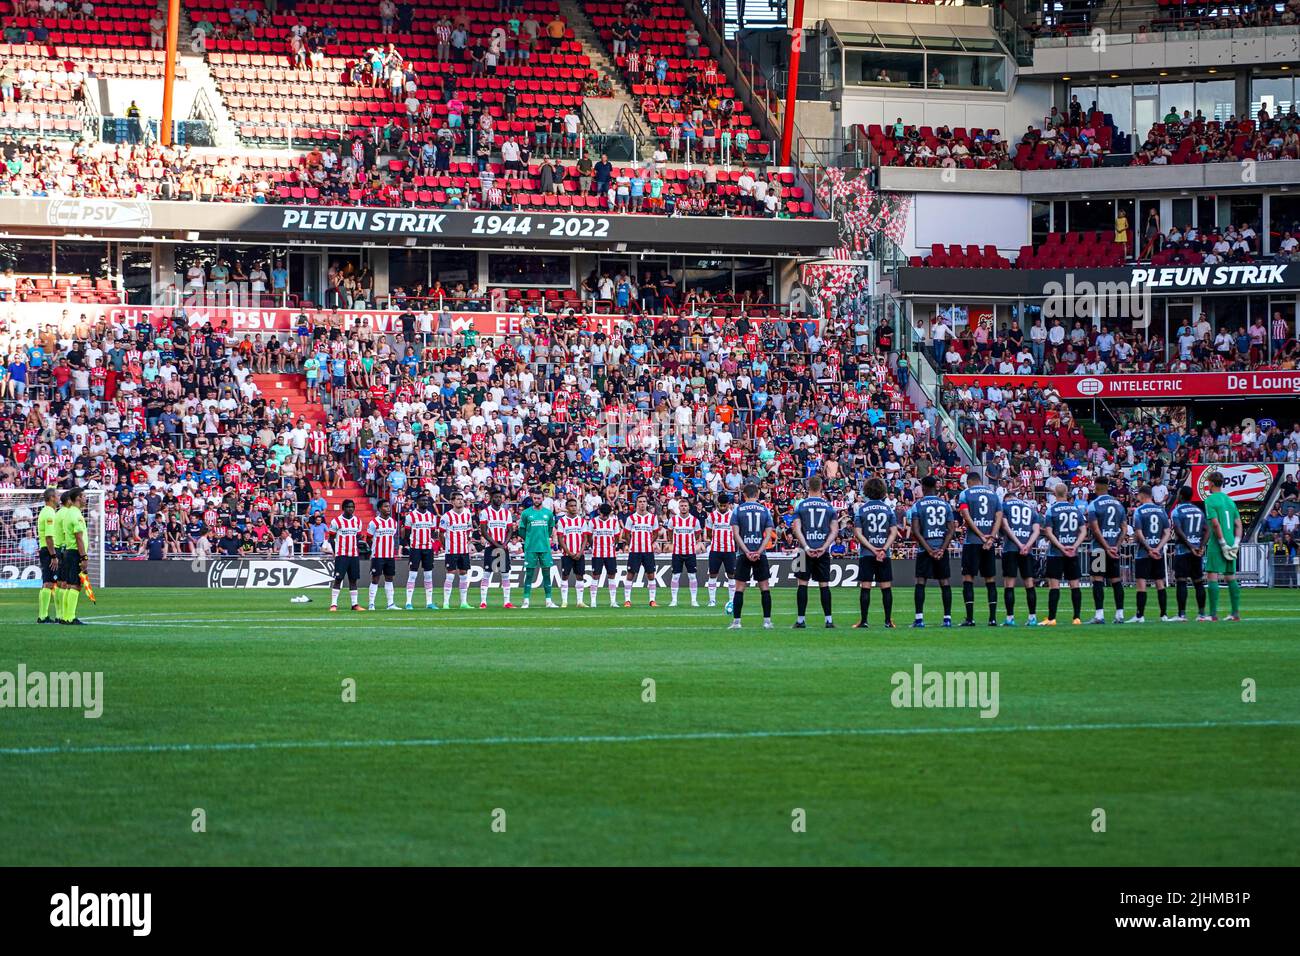 EINDHOVEN, NETHERLANDS - JULY 19: Minute silence for ex-PSV Eindhoven player Pleun Strik prior to the Friendly match between PSV Eindhoven and FC Eindhoven at Philips Stadion on July 19, 2022 in Eindhoven, Netherlands (Photo by Jeroen Meuwsen/Orange Pictures) Stock Photo